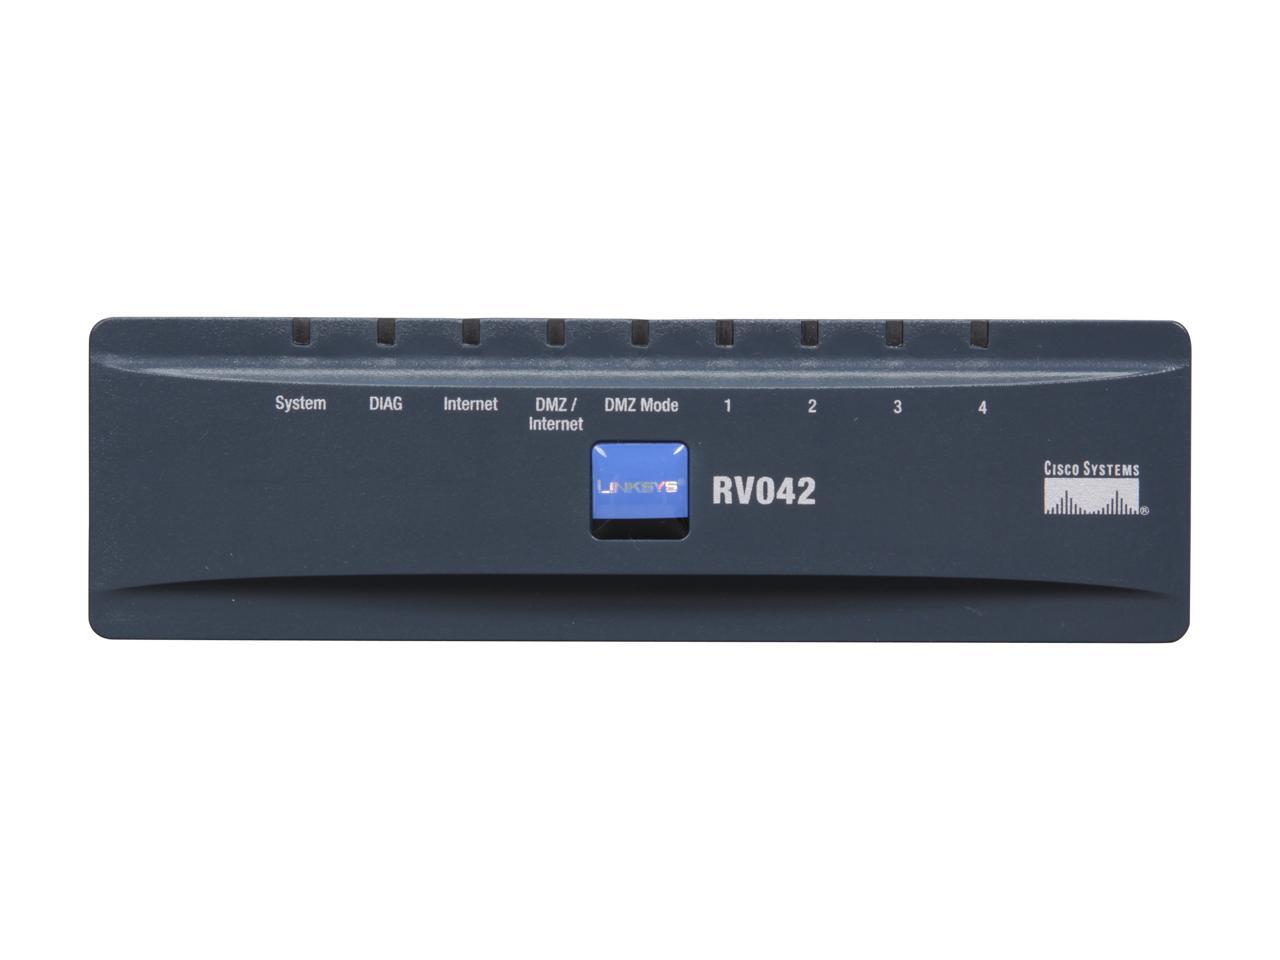 small business routers with vpn